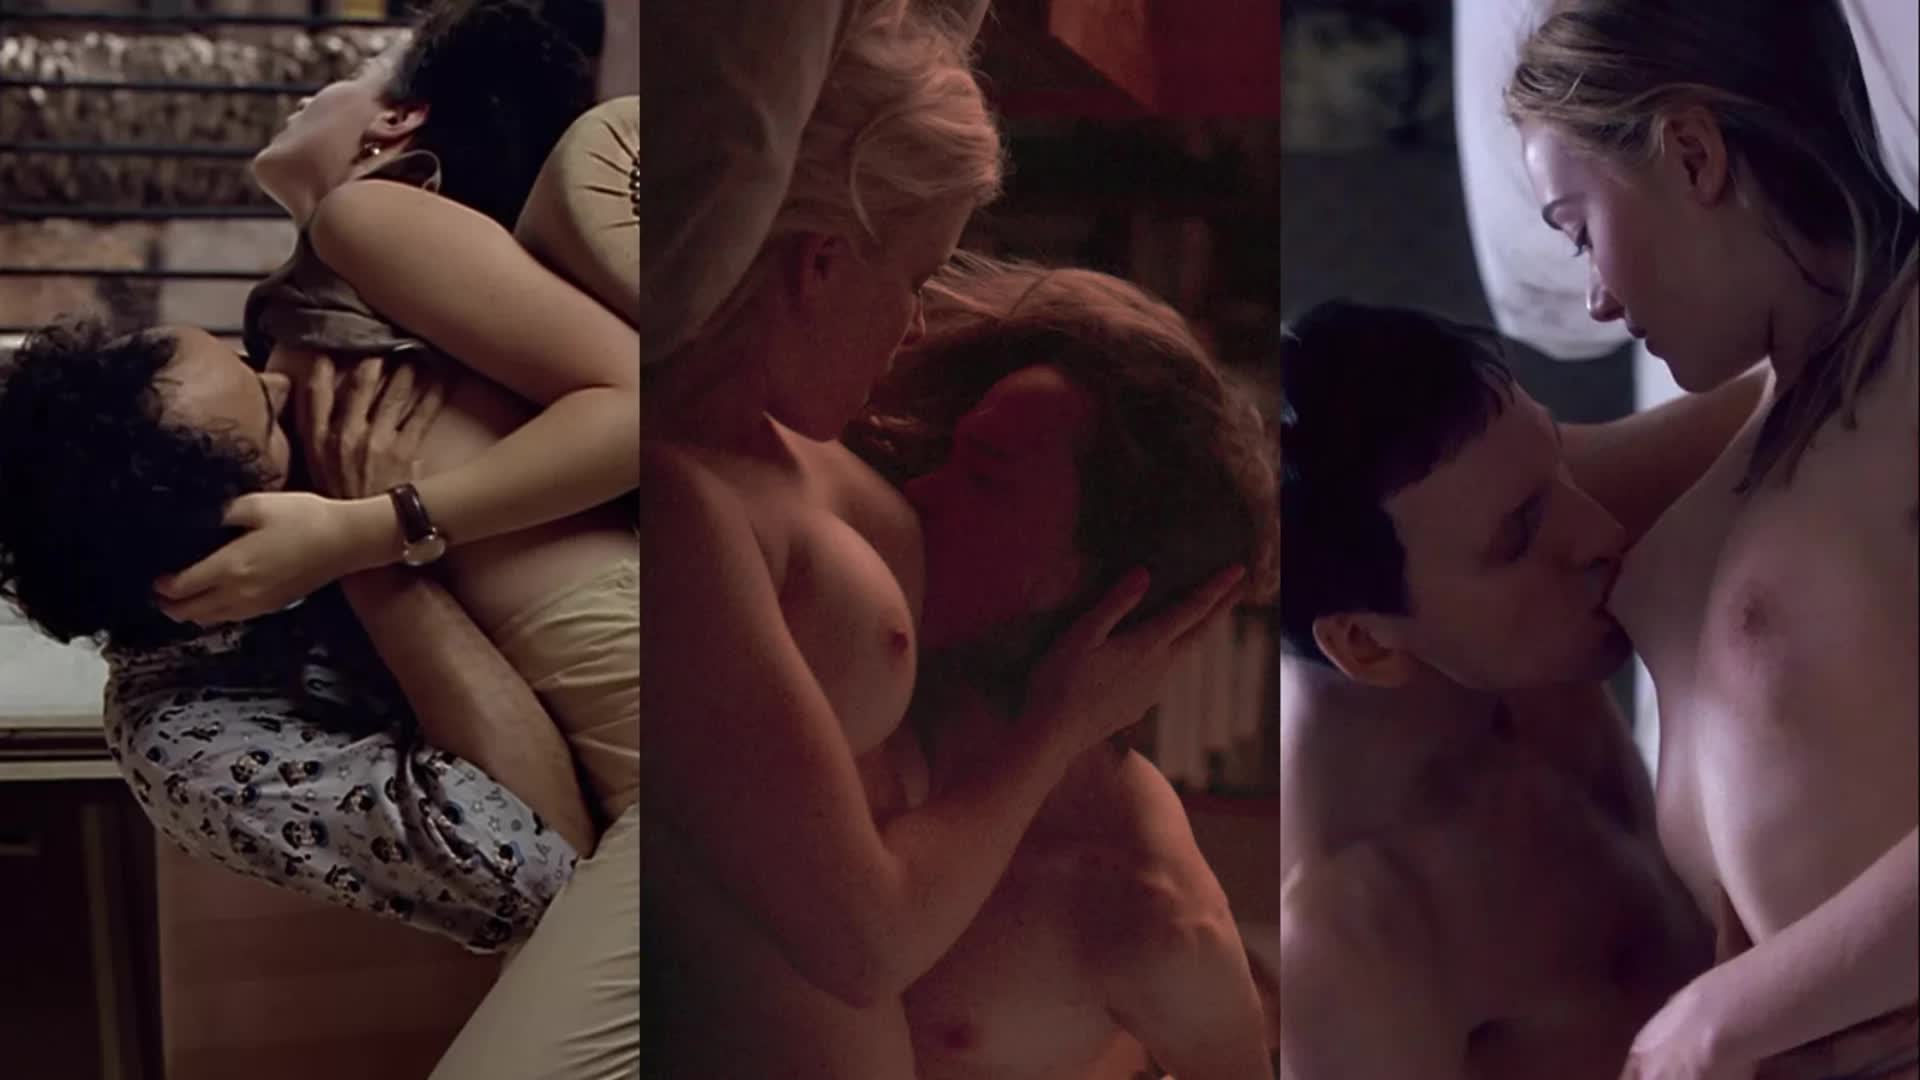 Kate Winslet Suck Big Boob Porn - Nude Scenes: A Threesome of Kate's: Kate Beckinsale , Kate Mara and Kate  Winslet getting their tits sucked - GIF Video | nudecelebgifs.com